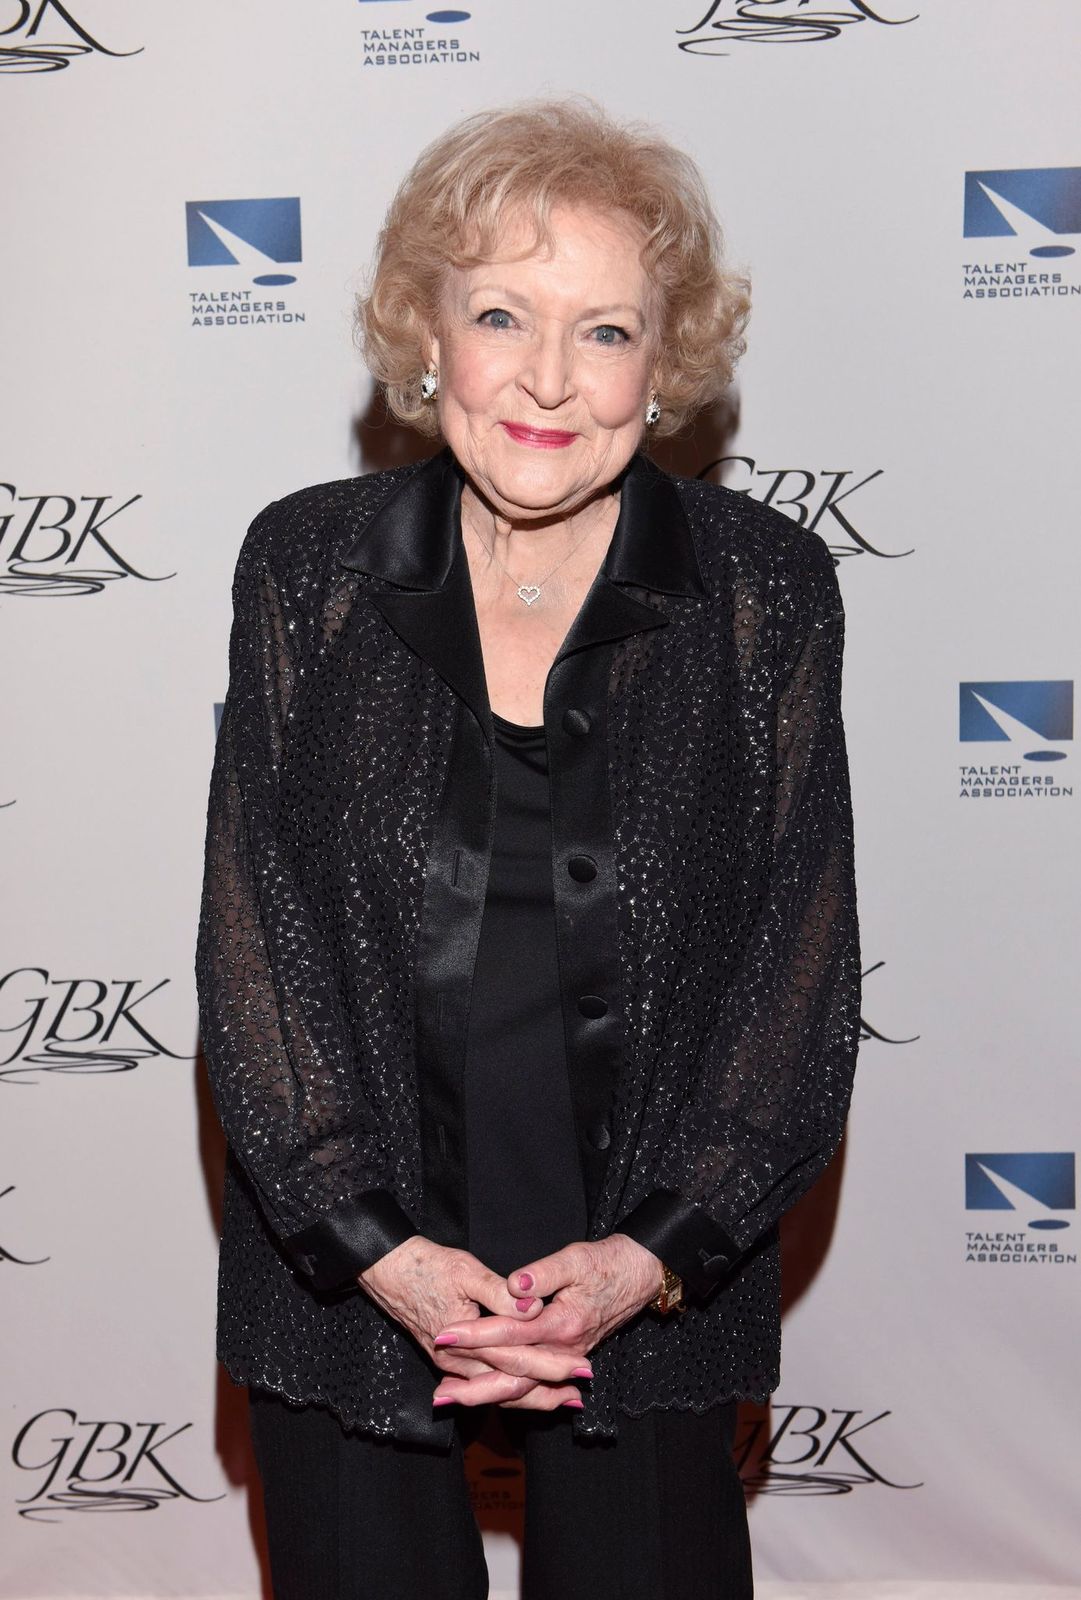 Betty White at The TMA Heller Awards on May 28, 2015 in Century City, California Photo Getty Images